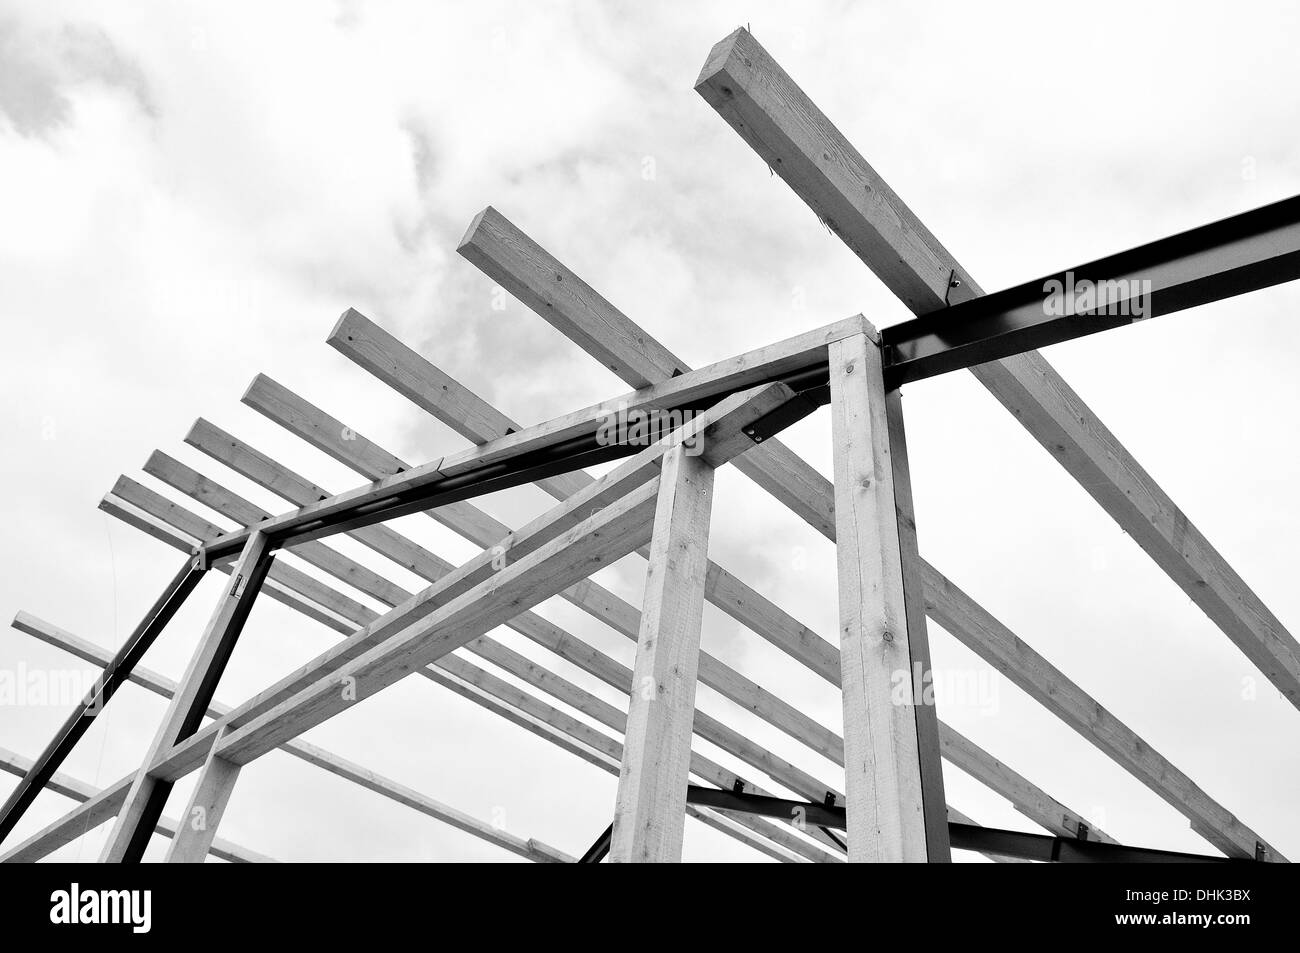 with wood and steel building construction Stock Photo